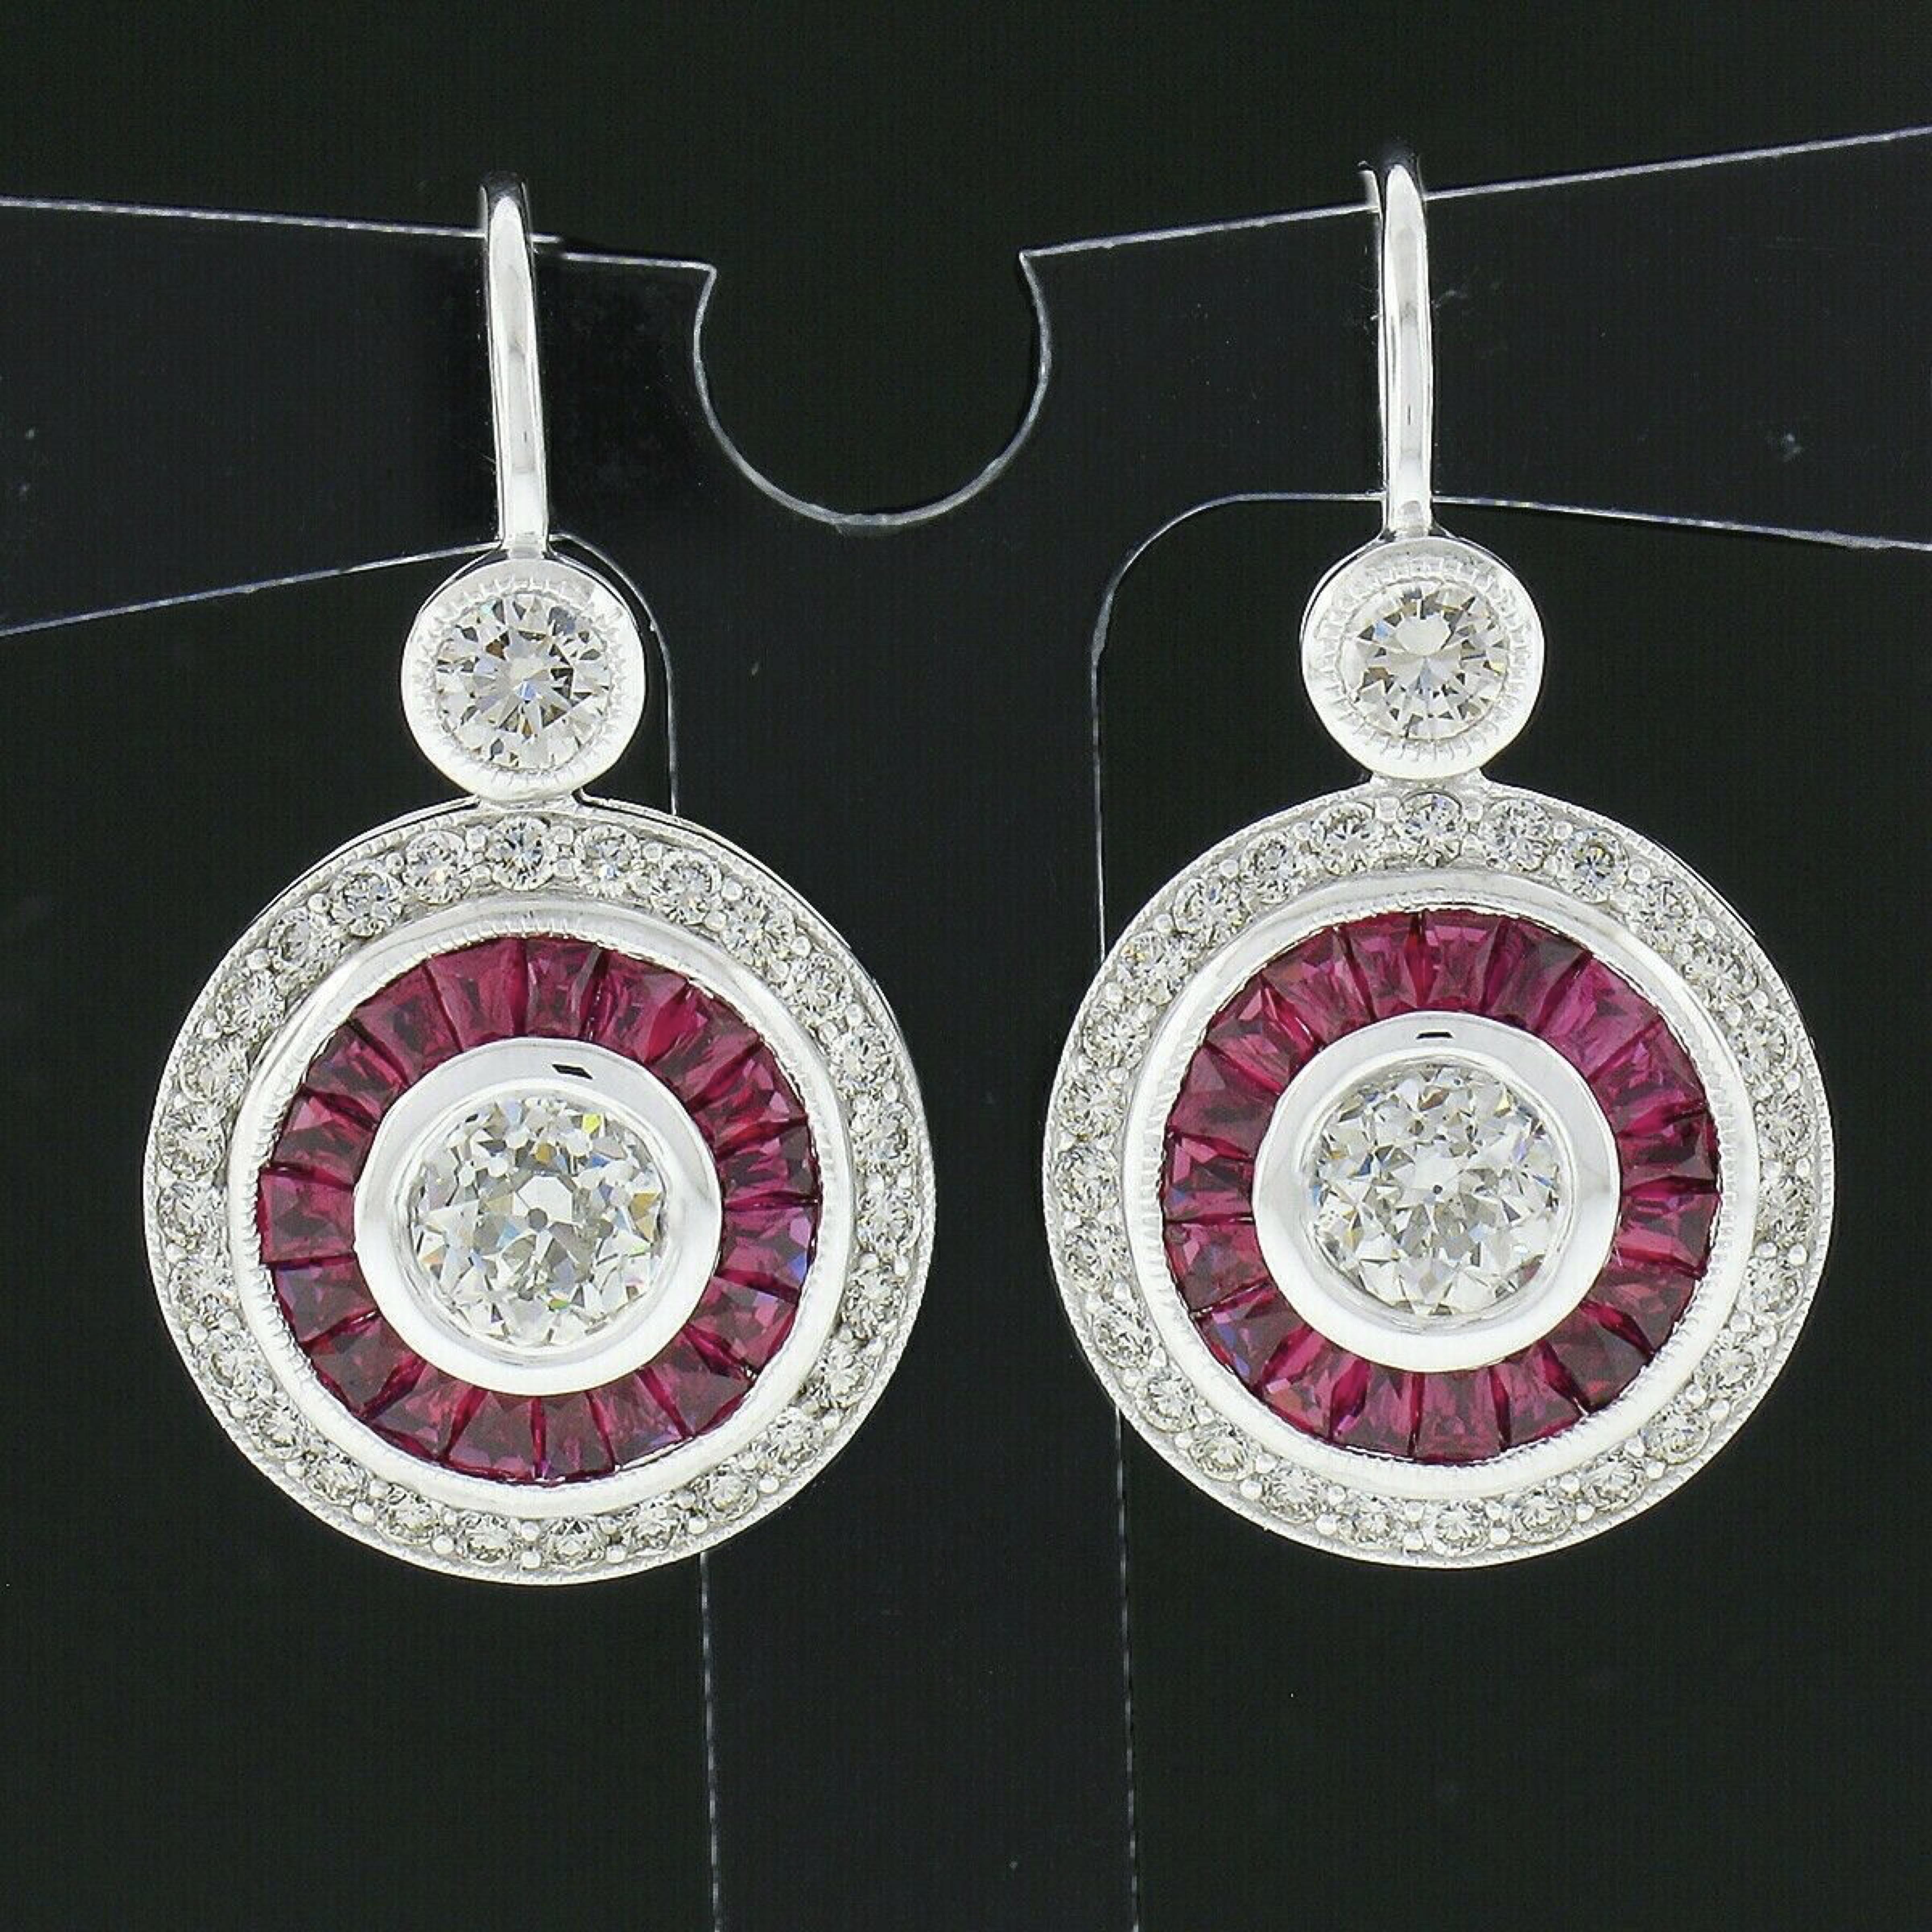 This spectacular and very well made pair of drop earrings is newly crafted in solid 14k white gold and feature two antique, old European cut, diamonds that are neatly bezel set at their center and further surrounded by gorgeous natural rubies and